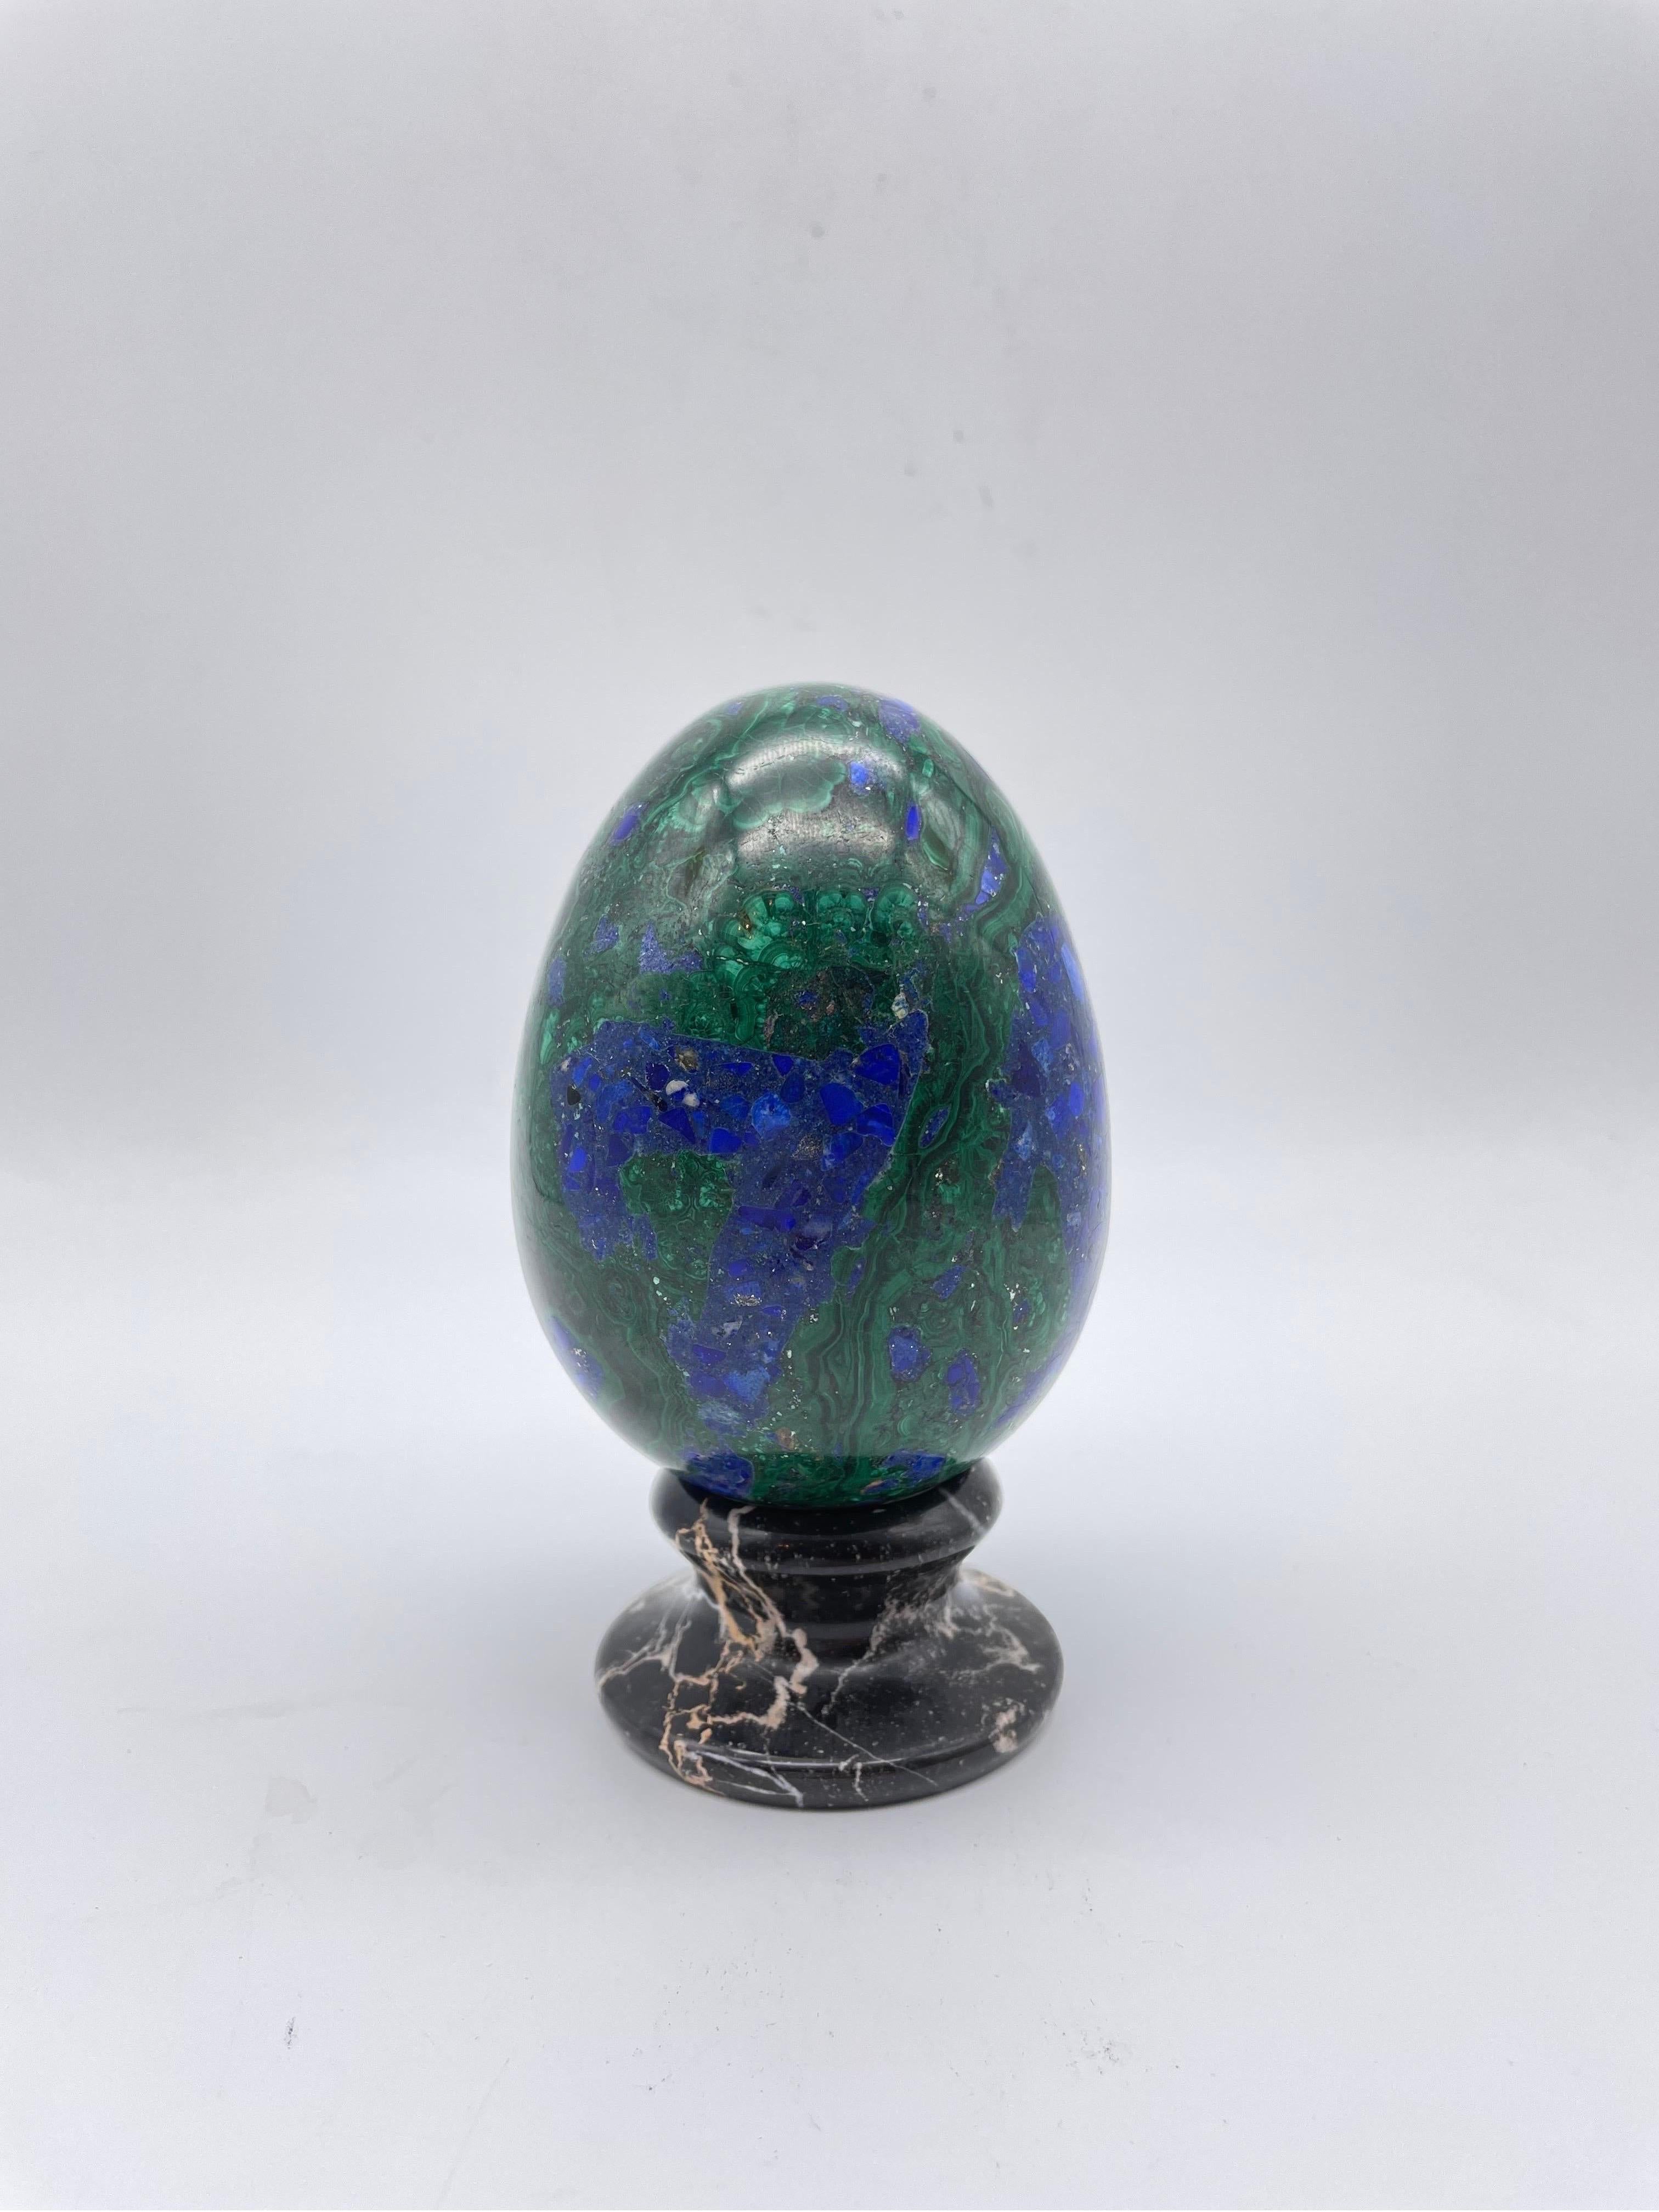 20th century rare Azurite Mineral egg on marble base

Unique egg-shaped azurite mineral on a marble base. Gorgeous color scheme. It is ideal as a table/desk decoration.

Azurite, also known under its mining name mountain blue, copper blue or